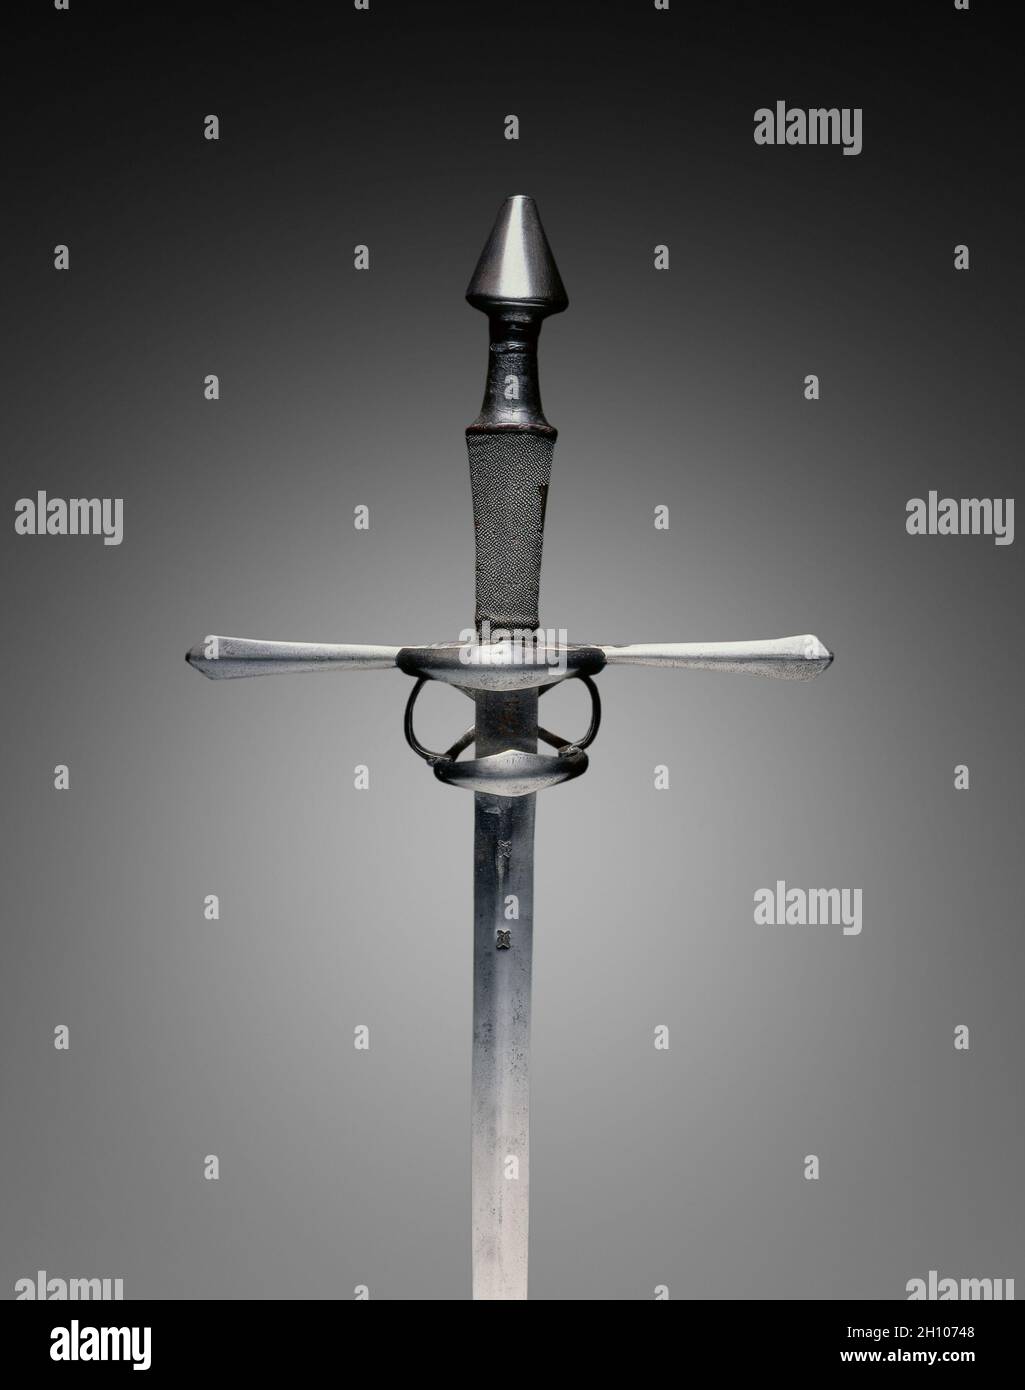 Hand-and-a-Half Sword, c.1540–80. Germany, 16th century. Steel; wood, leather, sharkskin grip; overall: 116.8 cm (46 in.); blade: 94.8 cm (37 5/16 in.); quillions: 31 cm (12 3/16 in.); grip: 21 cm (8 1/4 in.). Stock Photo